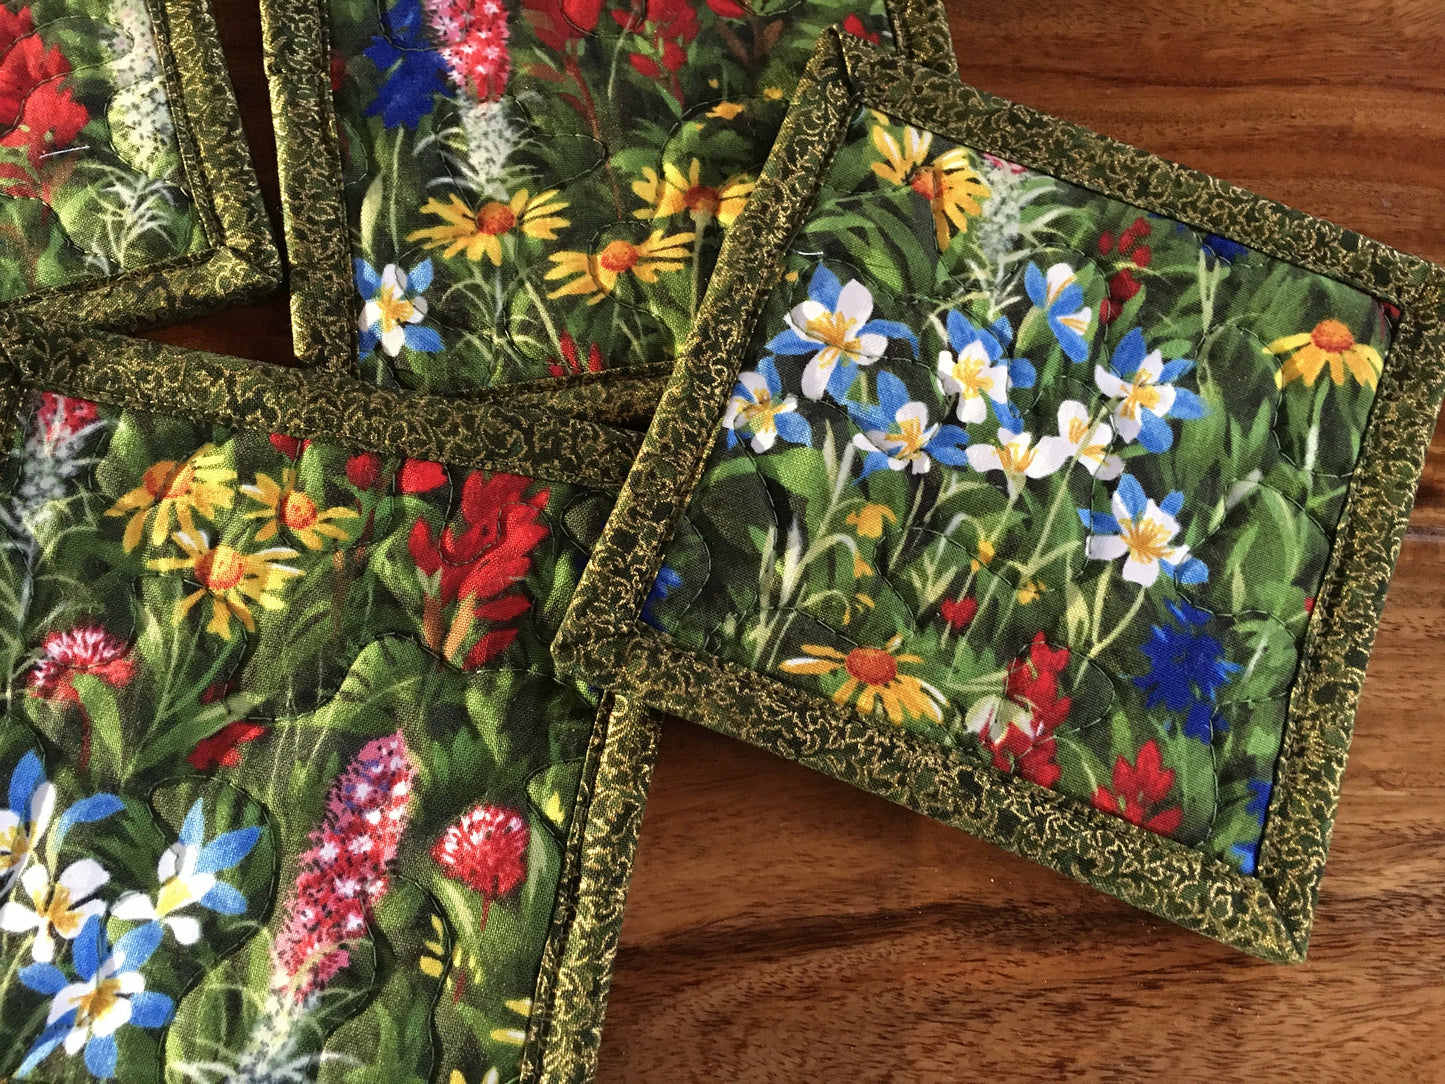 Fabric Hot Cold Drink Quilted Coasters, Texas Wildflowers Blue Red Yellow, Reversible Drink Mats, 5x5" Hot Cold Coffee Tea, Teacher Gift